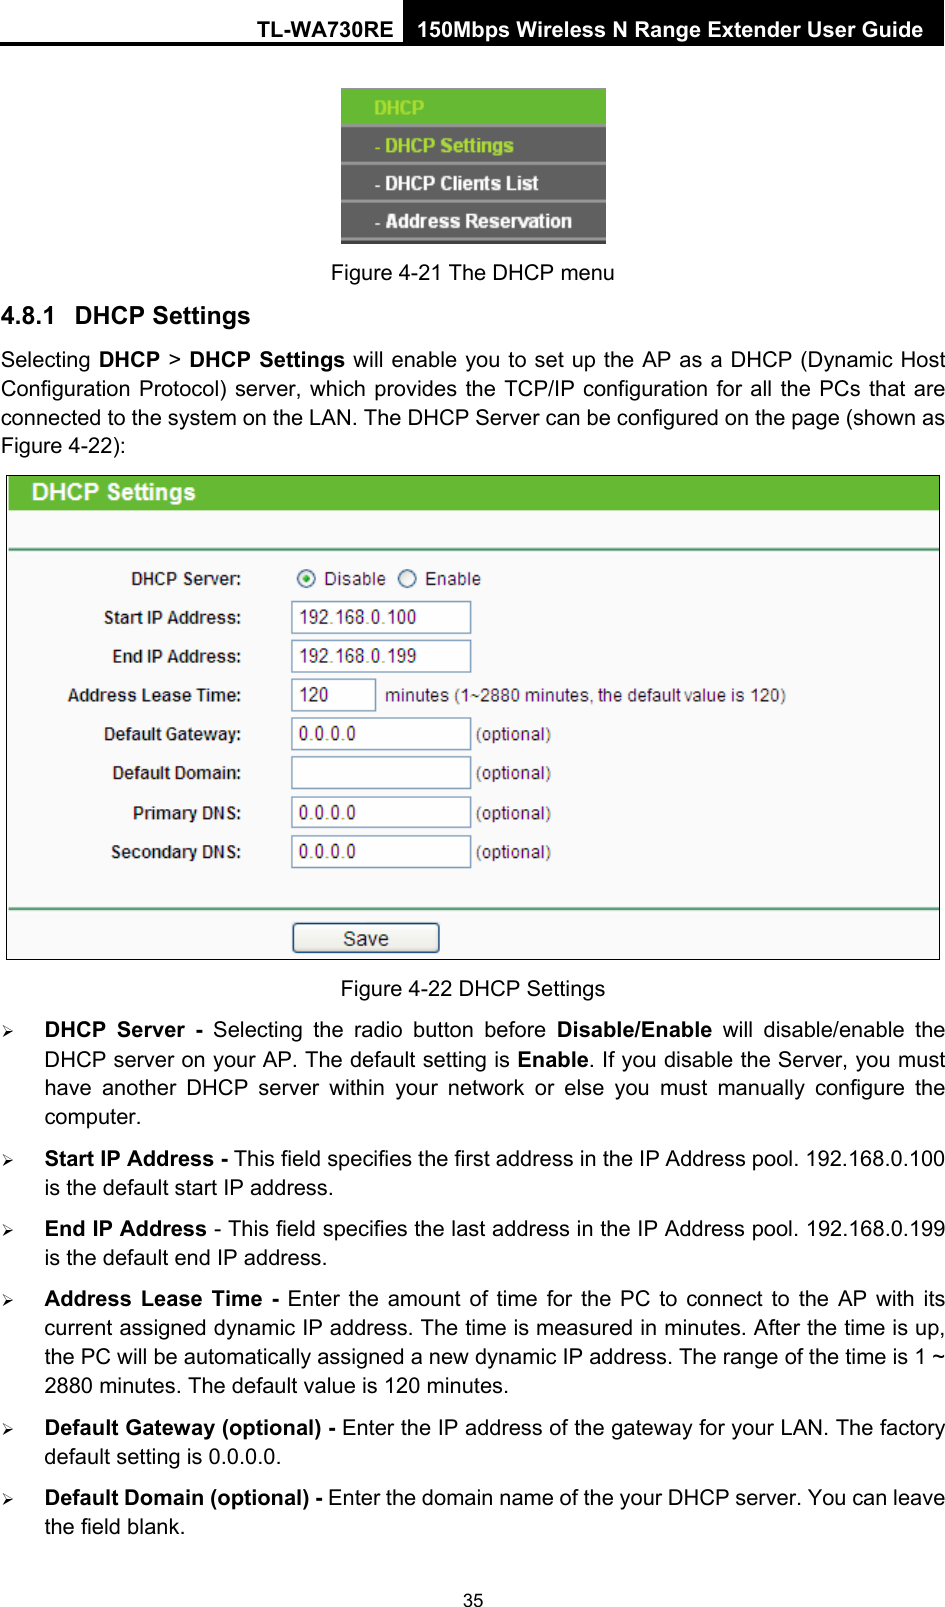 TL-WA730RE 150Mbps Wireless N Range Extender User Guide  Figure 4-21 The DHCP menu 4.8.1  DHCP Settings Selecting DHCP &gt; DHCP Settings will enable you to set up the AP as a DHCP (Dynamic Host Configuration Protocol) server, which provides the TCP/IP configuration for all the PCs that are connected to the system on the LAN. The DHCP Server can be configured on the page (shown as Figure 4-22):  Figure 4-22 DHCP Settings ¾ DHCP Server - Selecting the radio button before Disable/Enable will disable/enable the DHCP server on your AP. The default setting is Enable. If you disable the Server, you must have another DHCP server within your network or else you must manually configure the computer. ¾ Start IP Address - This field specifies the first address in the IP Address pool. 192.168.0.100 is the default start IP address.   ¾ End IP Address - This field specifies the last address in the IP Address pool. 192.168.0.199 is the default end IP address.   ¾ Address Lease Time - Enter the amount of time for the PC to connect to the AP with its current assigned dynamic IP address. The time is measured in minutes. After the time is up, the PC will be automatically assigned a new dynamic IP address. The range of the time is 1 ~ 2880 minutes. The default value is 120 minutes. ¾ Default Gateway (optional) - Enter the IP address of the gateway for your LAN. The factory default setting is 0.0.0.0. ¾ Default Domain (optional) - Enter the domain name of the your DHCP server. You can leave the field blank. 35 